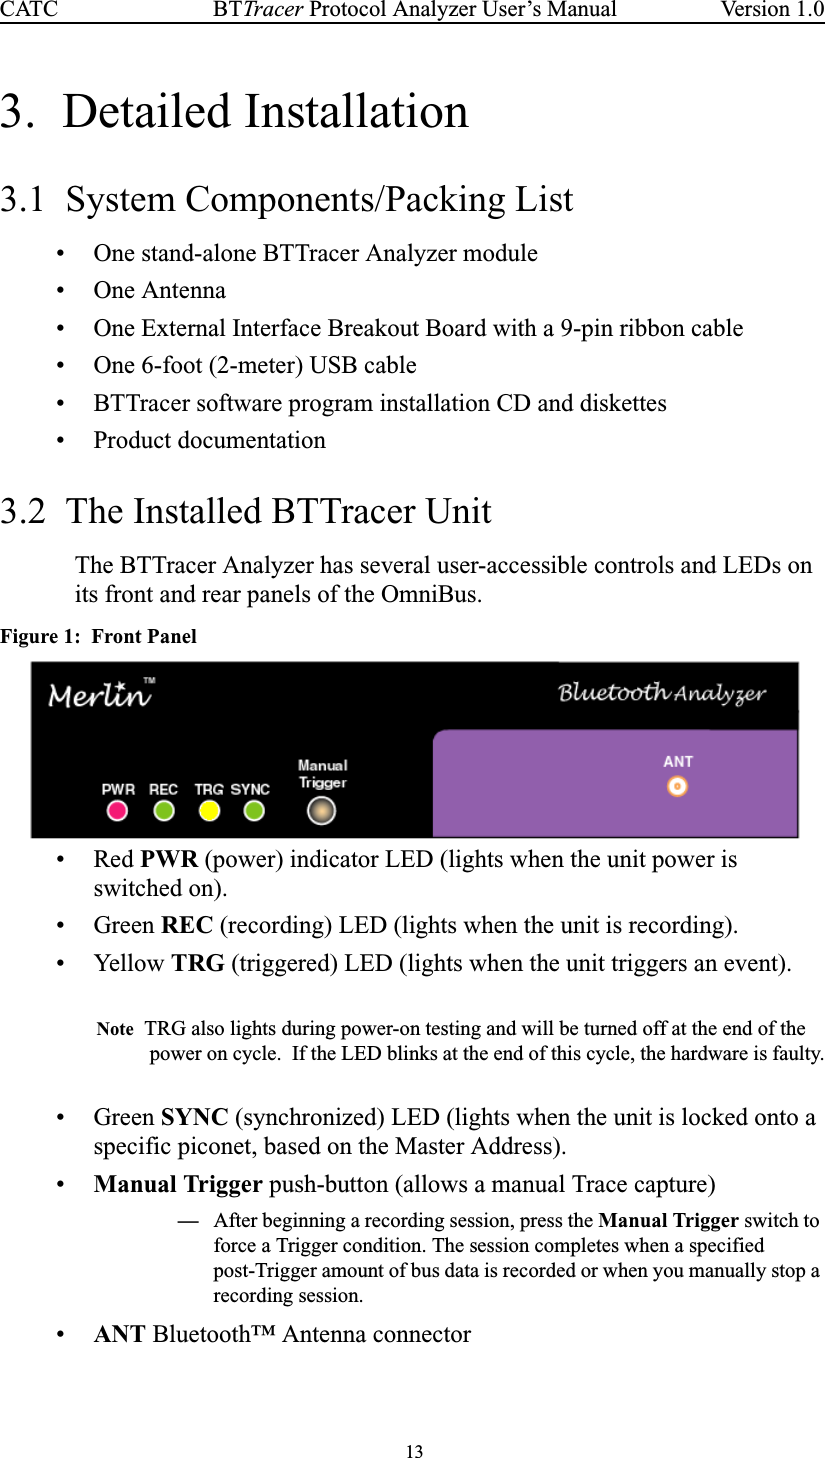 13BTTracer Protocol Analyzer User’s ManualCATC Version 1.03. Detailed Installation3.1 System Components/Packing List• One stand-alone BTTracer Analyzer module• One Antenna• One External Interface Breakout Board with a 9-pin ribbon cable• One 6-foot (2-meter) USB cable• BTTracer software program installation CD and diskettes• Product documentation3.2 The Installed BTTracer UnitThe BTTracer Analyzer has several user-accessible controls and LEDs onits front and rear panels of the OmniBus.Figure 1: Front Panel•RedPWR (power) indicator LED (lights when the unit power isswitched on).•GreenREC (recording) LED (lights when the unit is recording).• Yellow TRG (triggered) LED (lights when the unit triggers an event).Note TRG also lights during power-on testing and will be turned off at the end of thepower on cycle. If the LED blinks at the end of this cycle, the hardware is faulty.•GreenSYNC (synchronized) LED (lights when the unit is locked onto aspecific piconet, based on the Master Address).•Manual Trigger push-button (allows a manual Trace capture)—After beginning a recording session, press the Manual Trigger switch toforce a Trigger condition. The session completes when a specifiedpost-Trigger amount of bus data is recorded or when you manually stop arecording session.•ANT Bluetooth™ Antenna connector